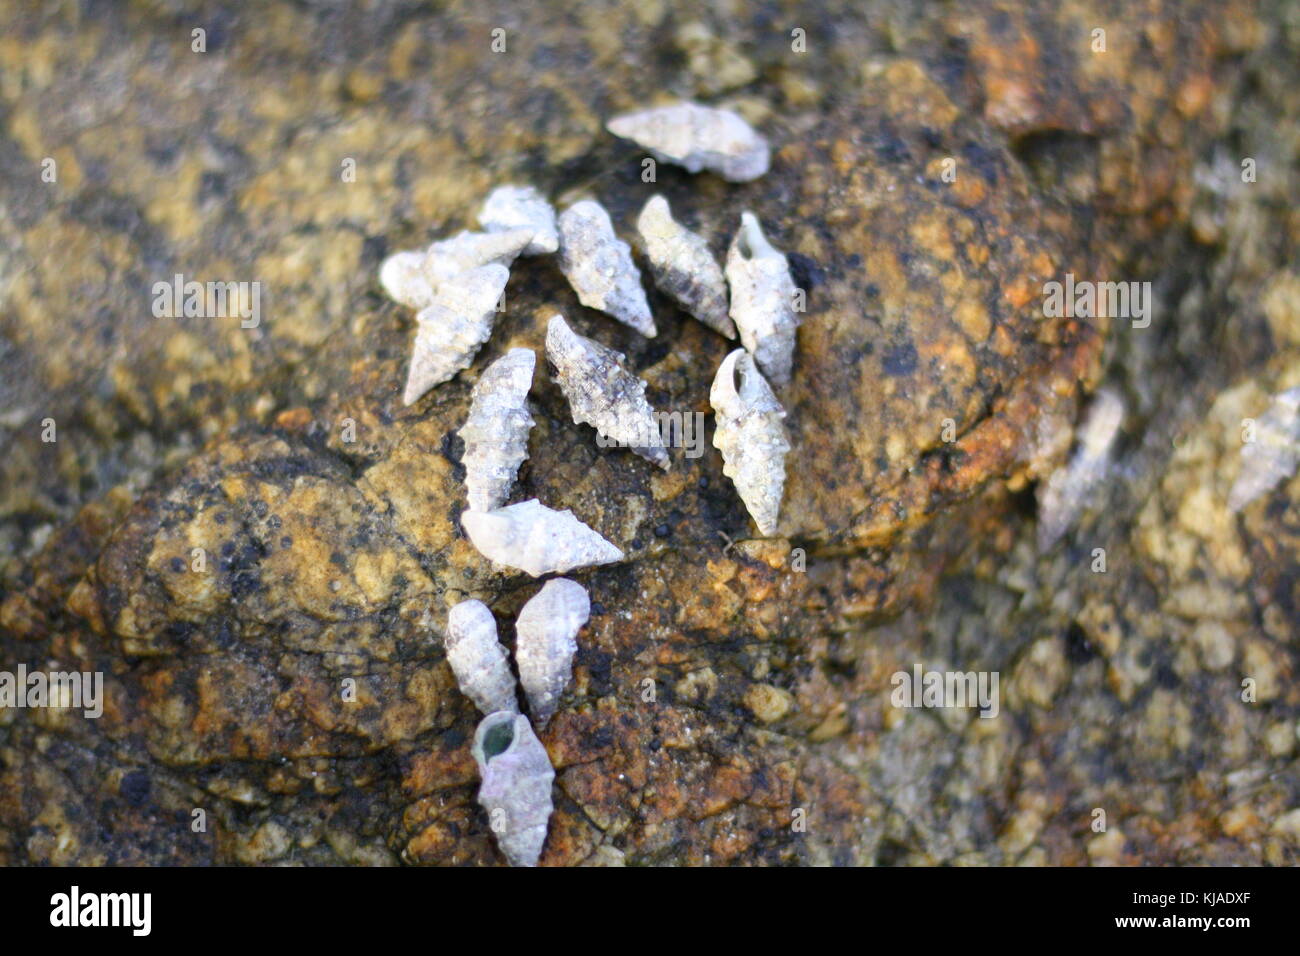 Several white cerith type sea shells living on a rock at the seaside. Stock Photo